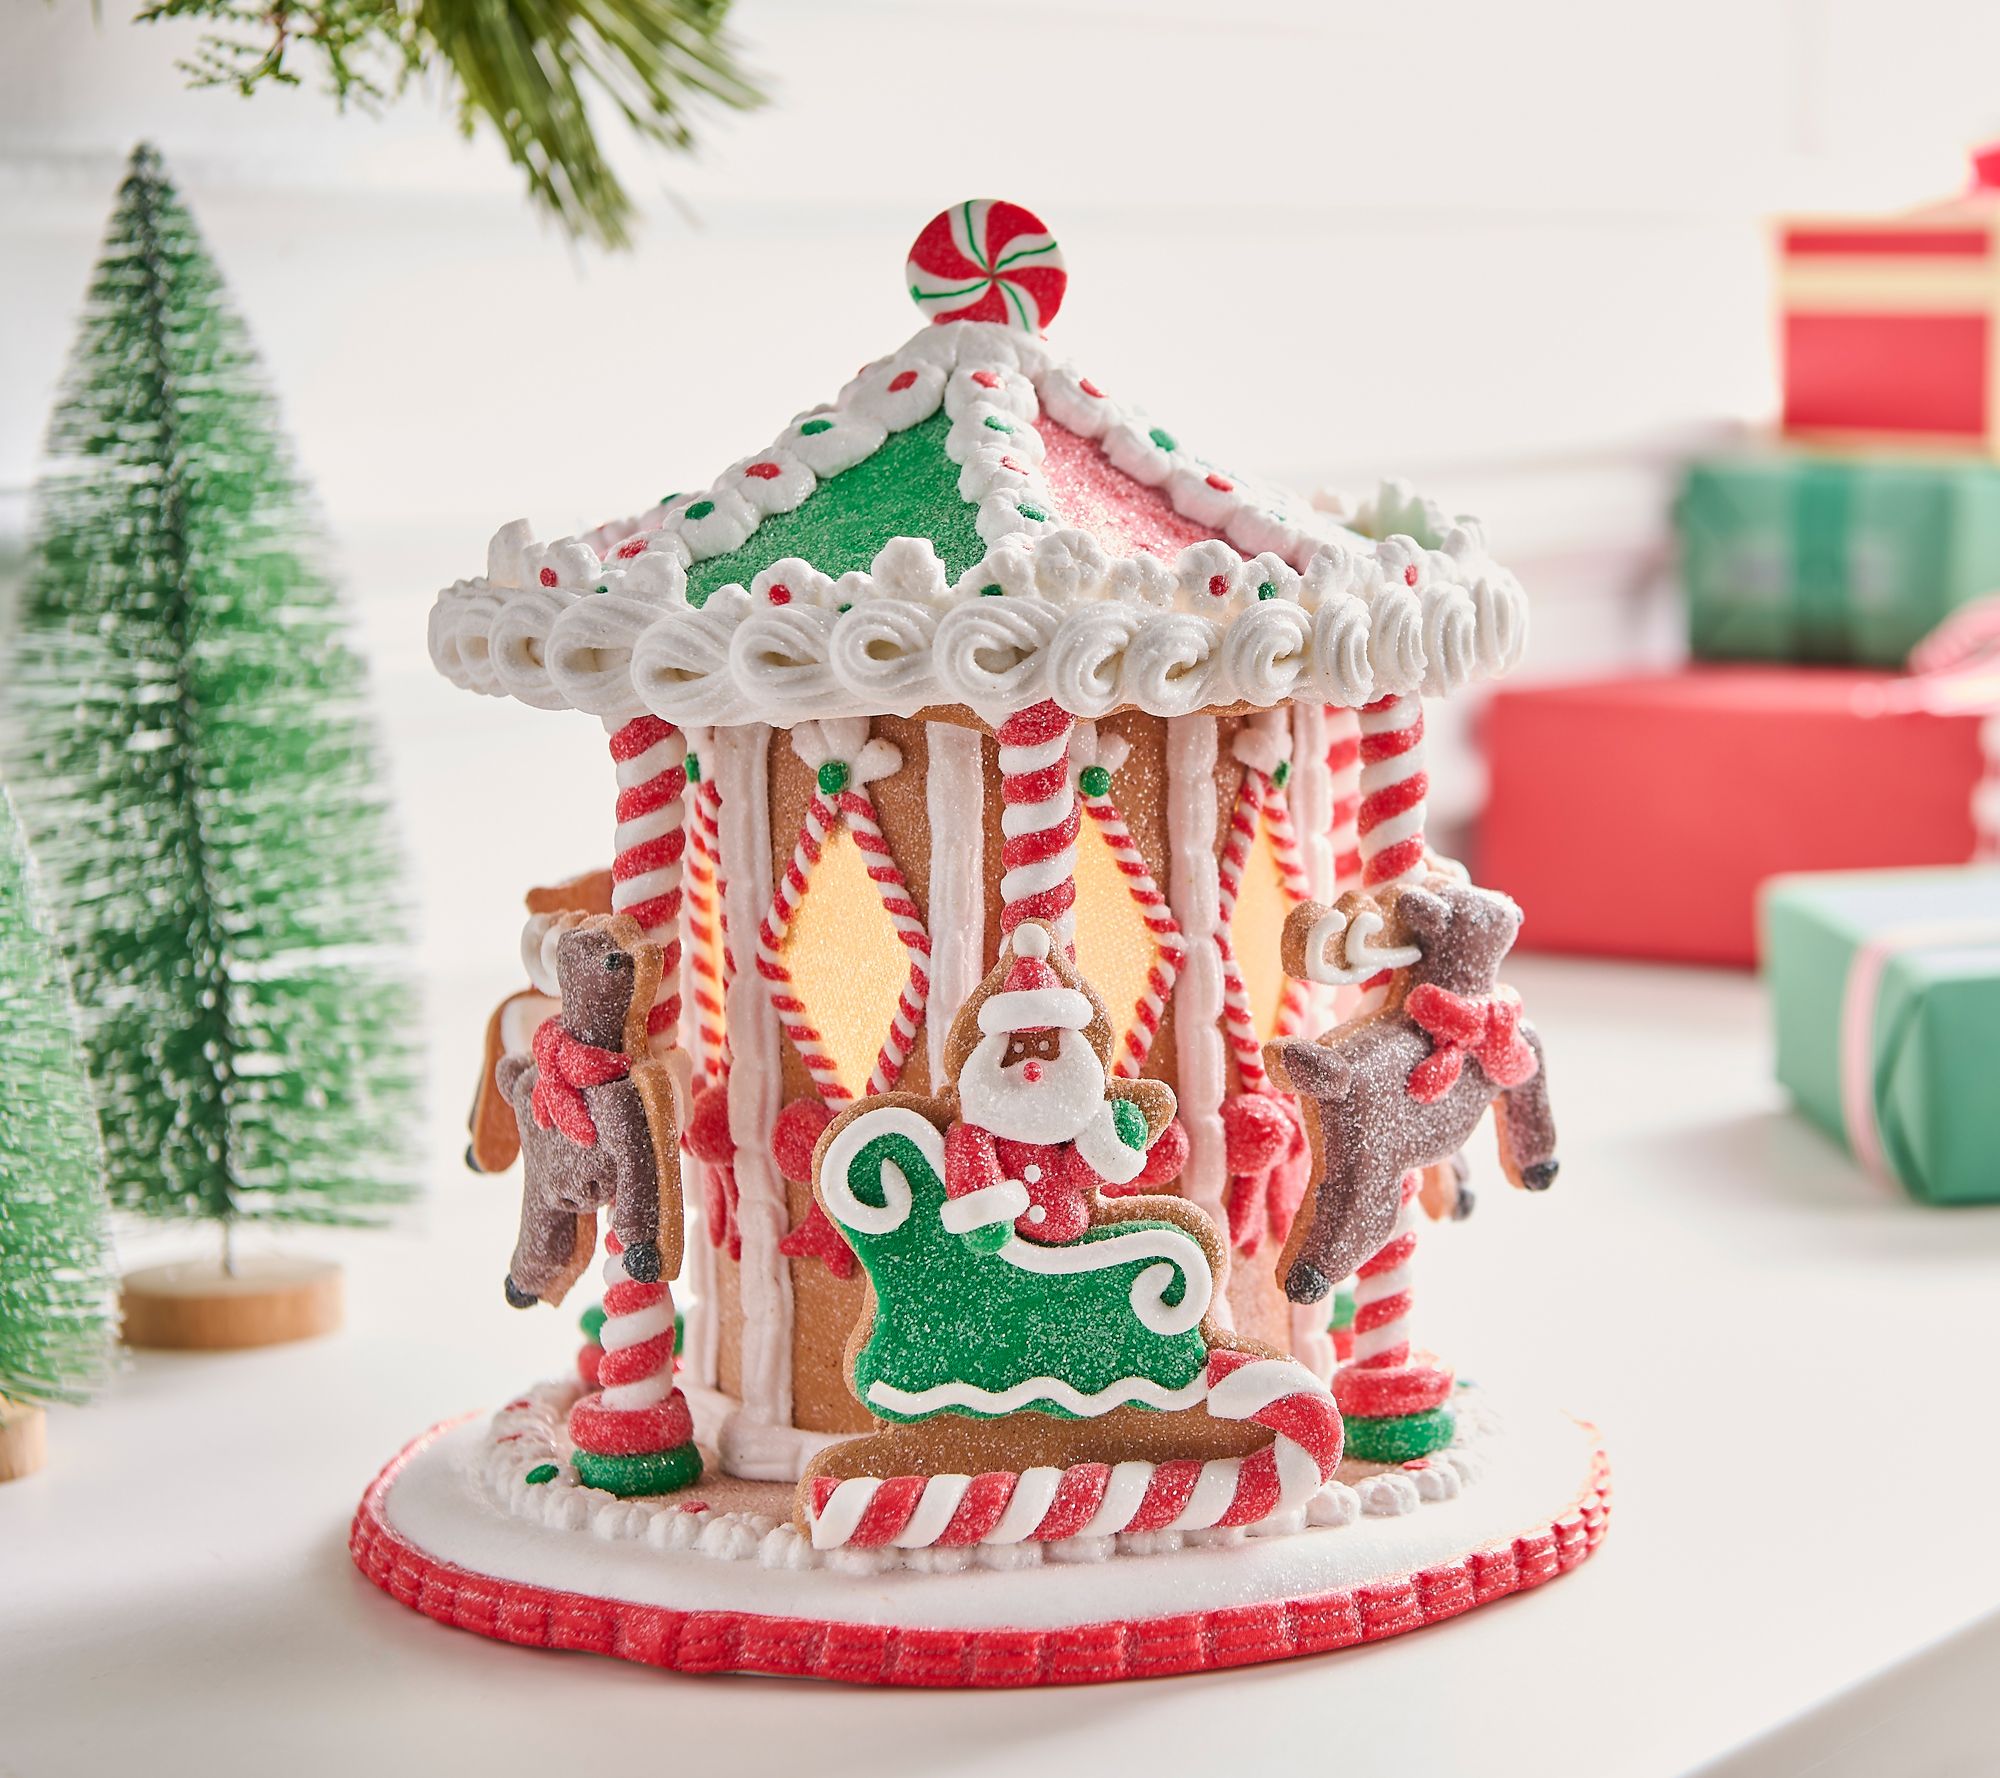 Illuminated Gingerbread Merry-Go-Round by Valeie 